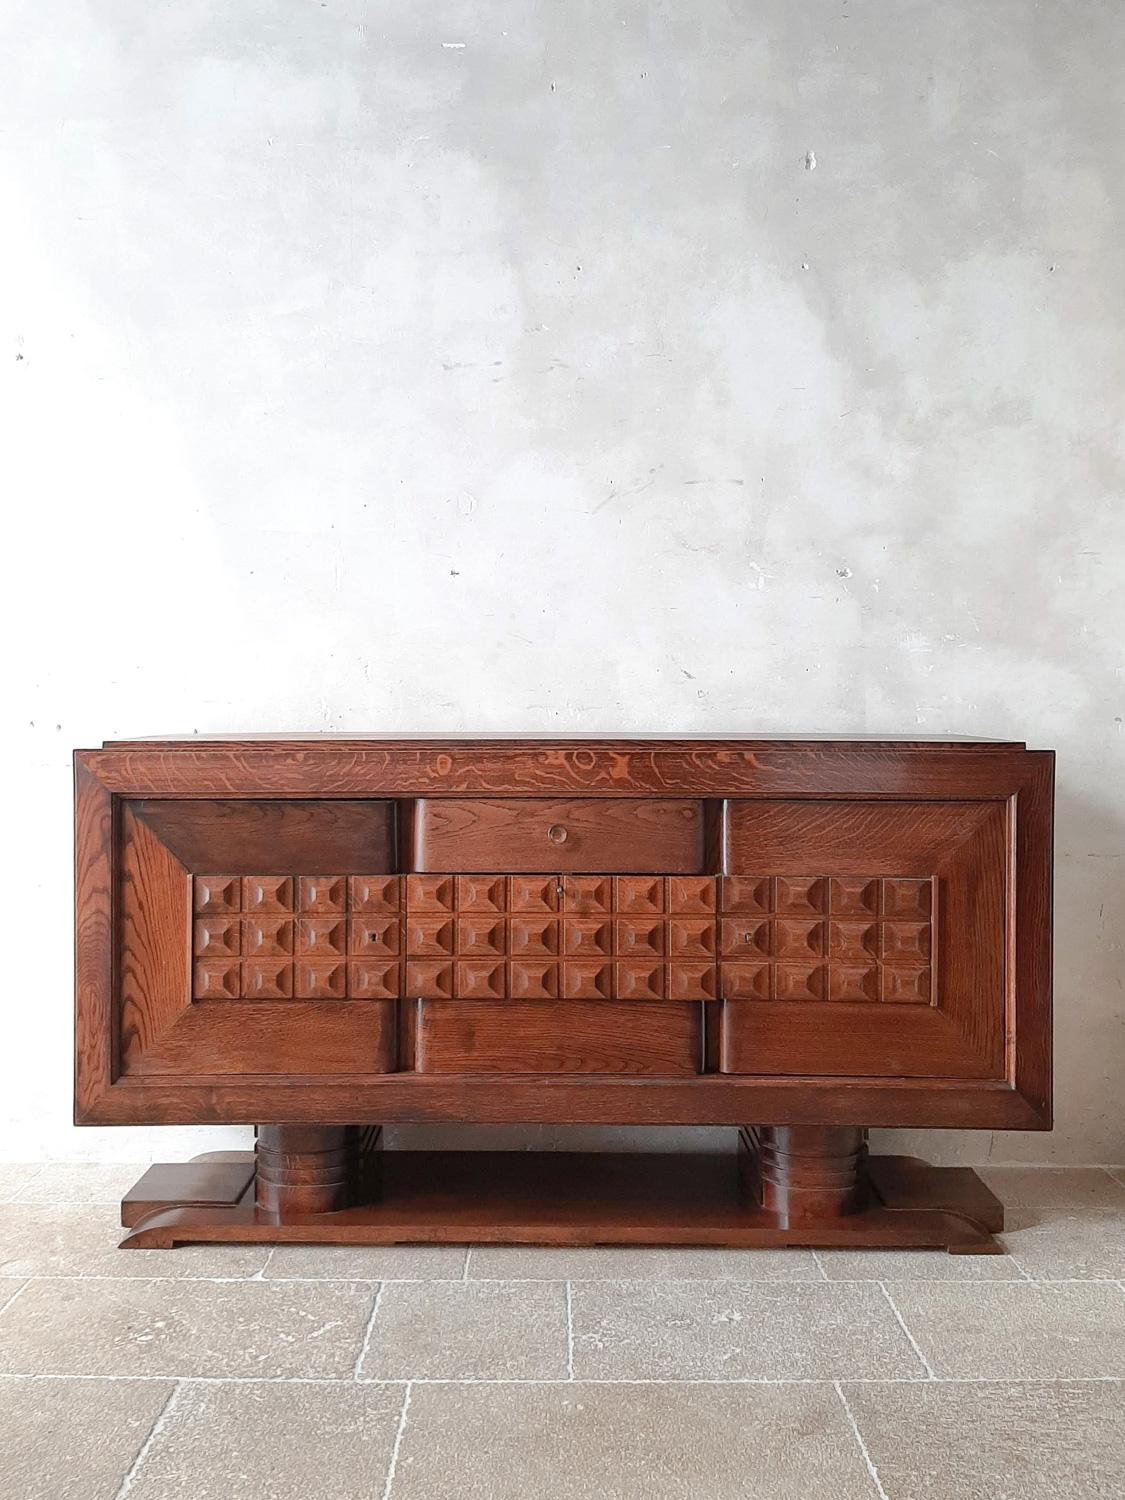 Midcentury brown oak sideboard by Charles Dudouyt, 1940s. Beautiful sideboard in pre-Brutalist Art Deco style decorated with typical geometric shapes of Dudouyt. The base gives this sideboard an extra sturdy character.

Dimensions: H 102 x W 200 x